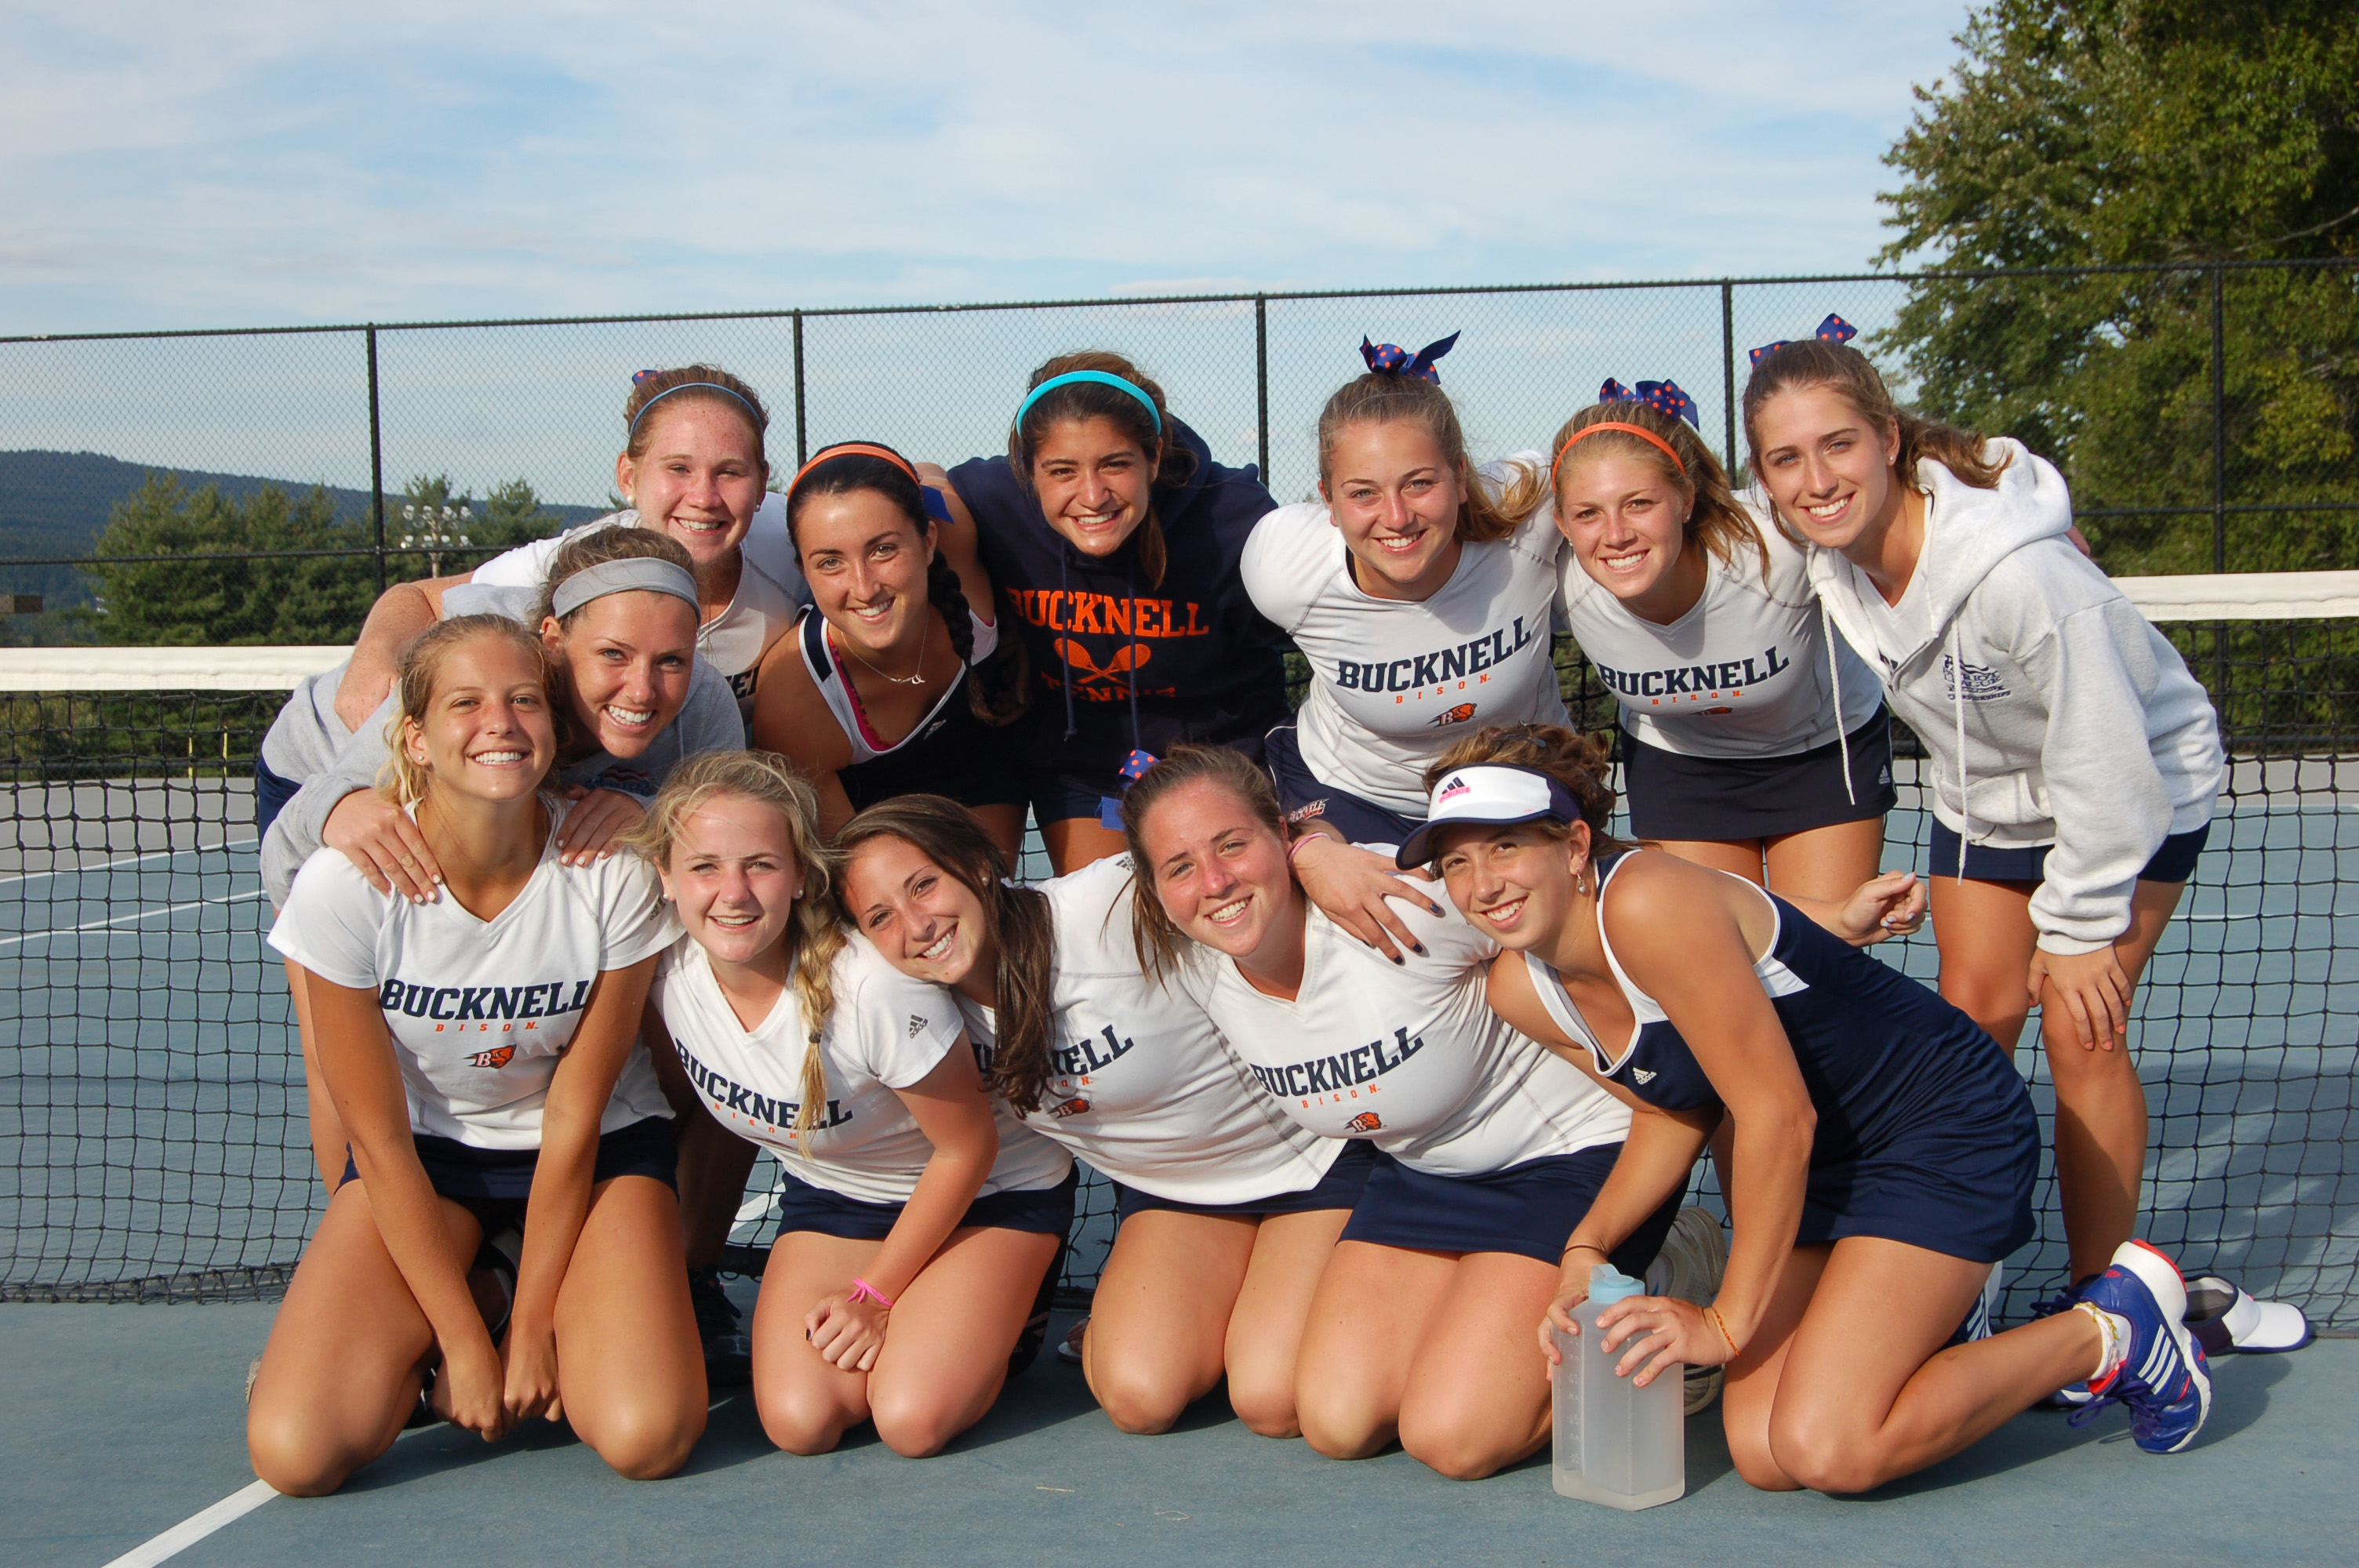 Women’s tennis strong at Mount St. Mary’s